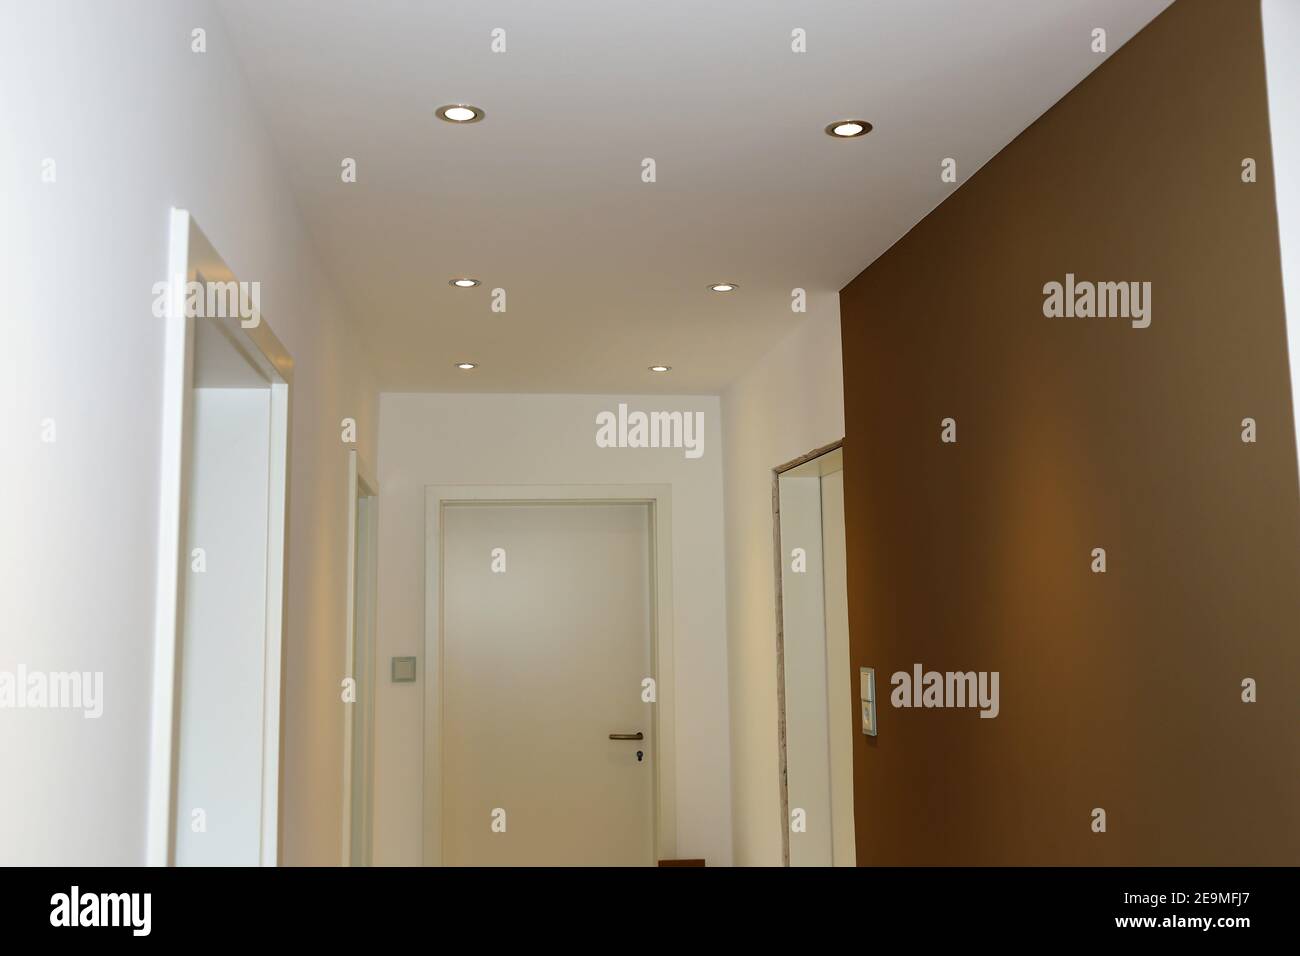 New renovated room with illuminated ceiling Stock Photo